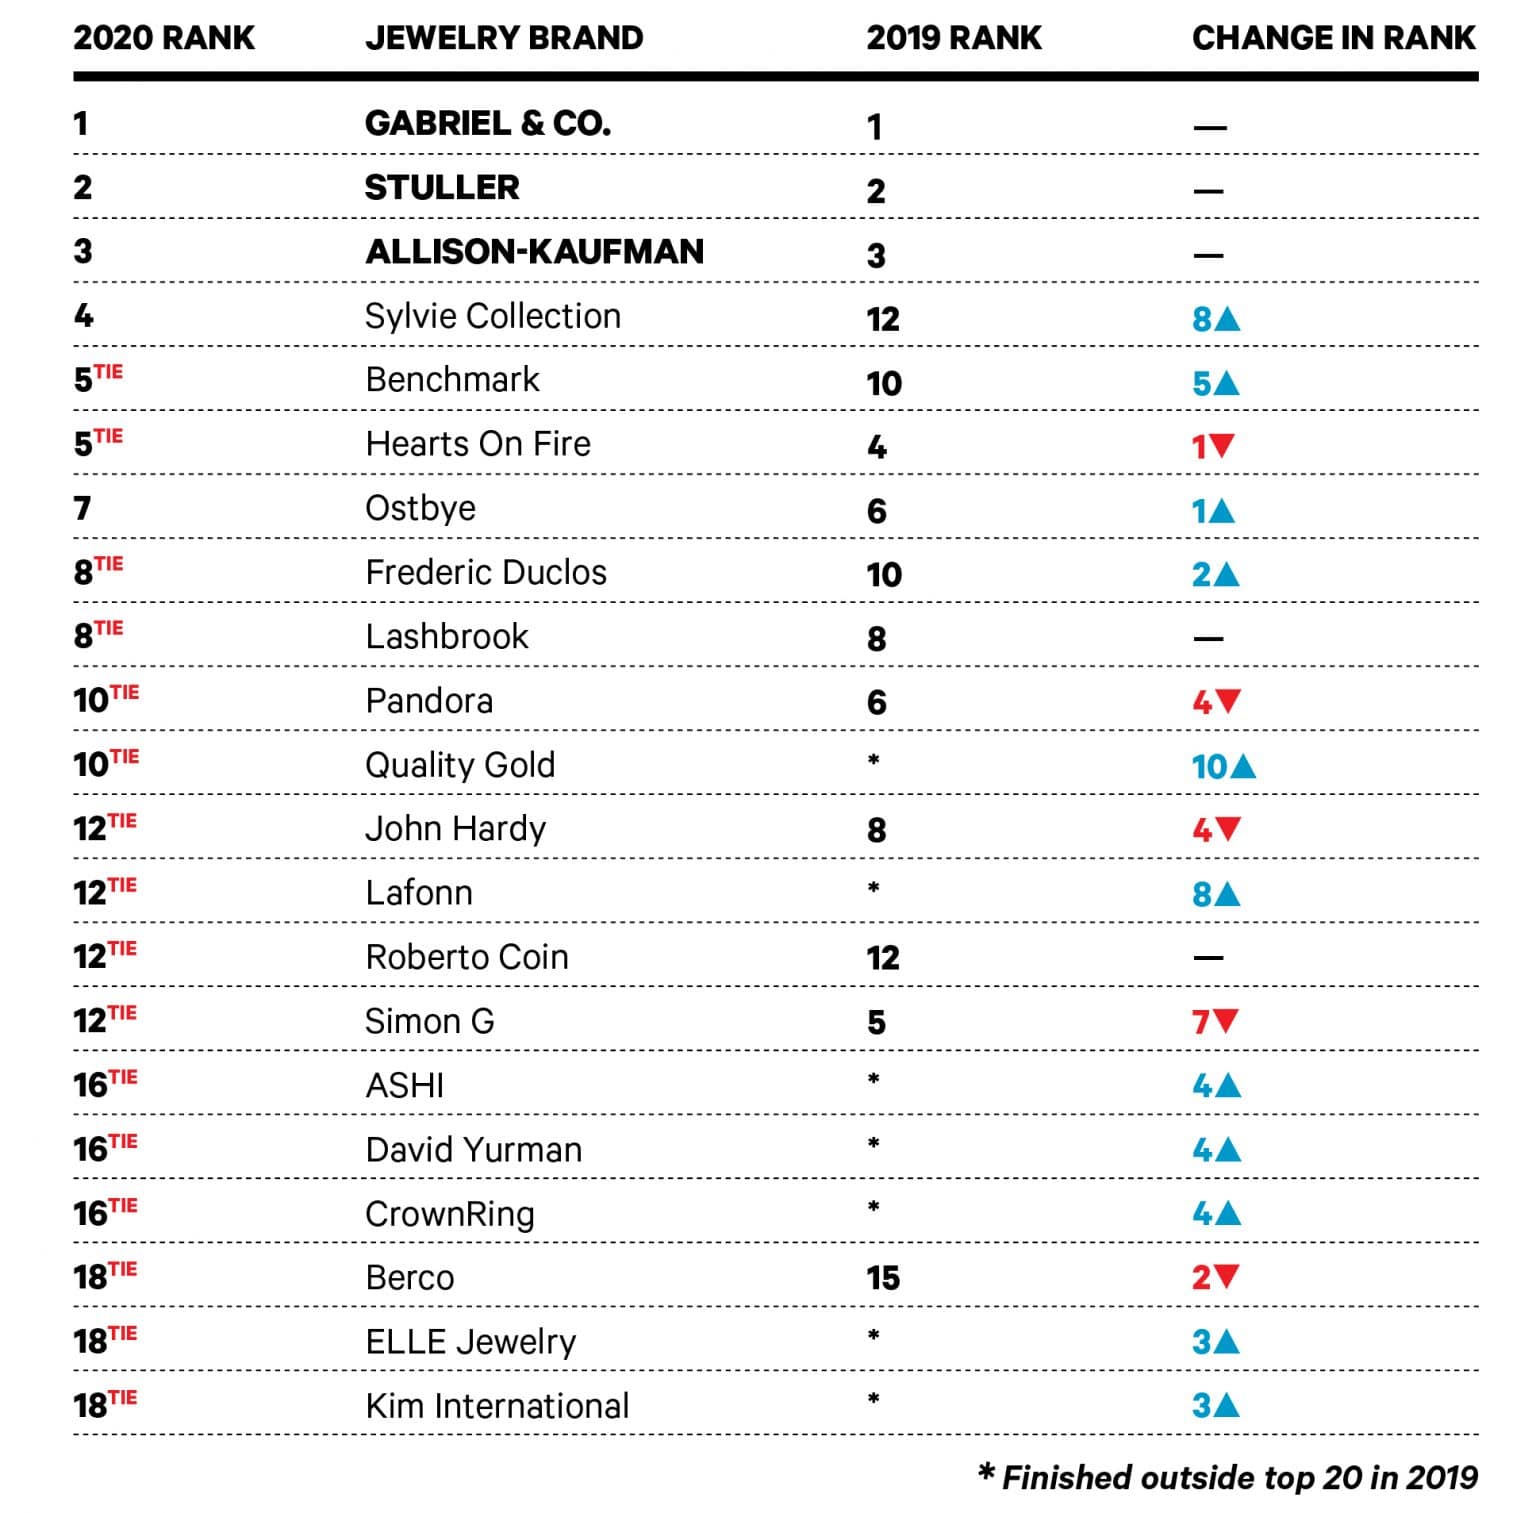 These Are the Top Jewelry Brands of 2020, According to the Big Survey